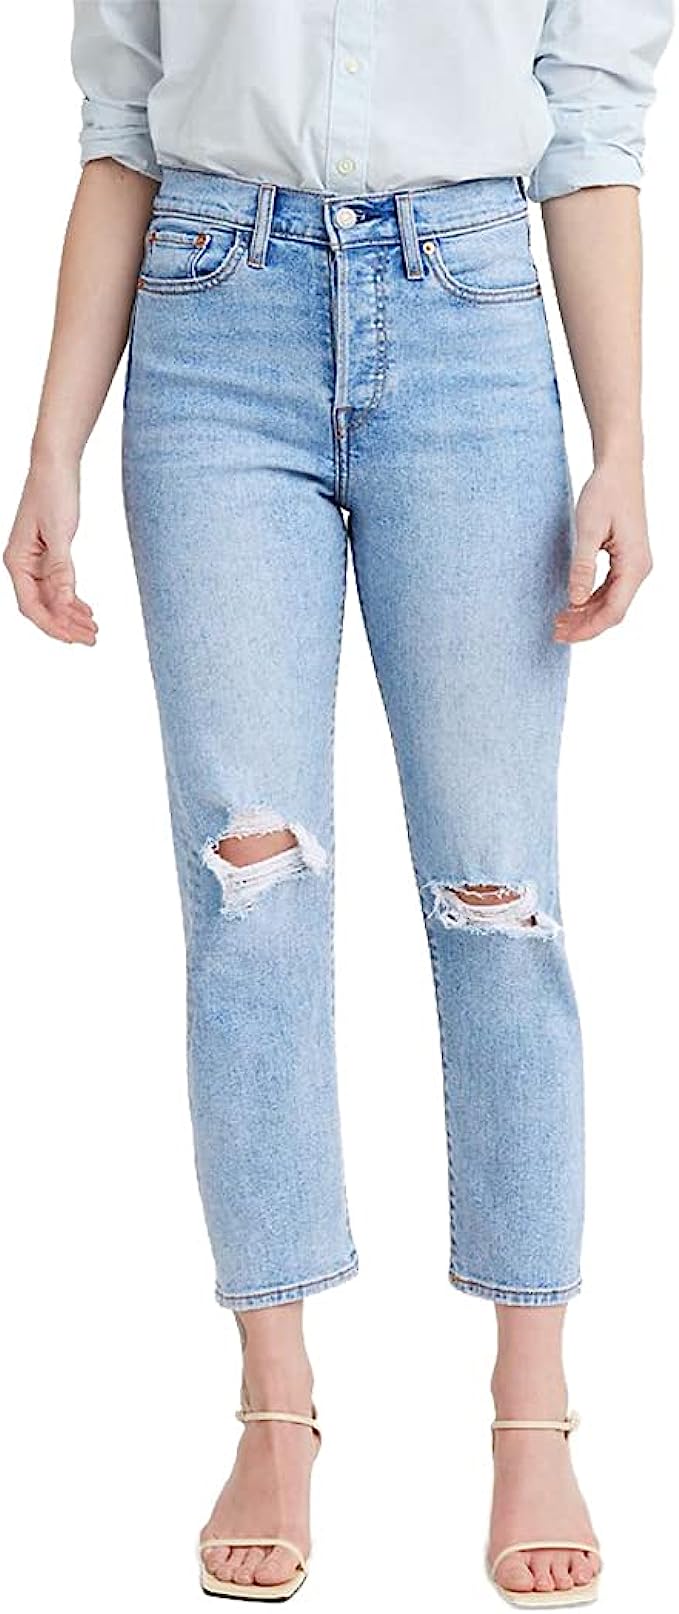 Snag This Prime Day Deal: 50% Off A Pair of Everyday Levi’s Jeans